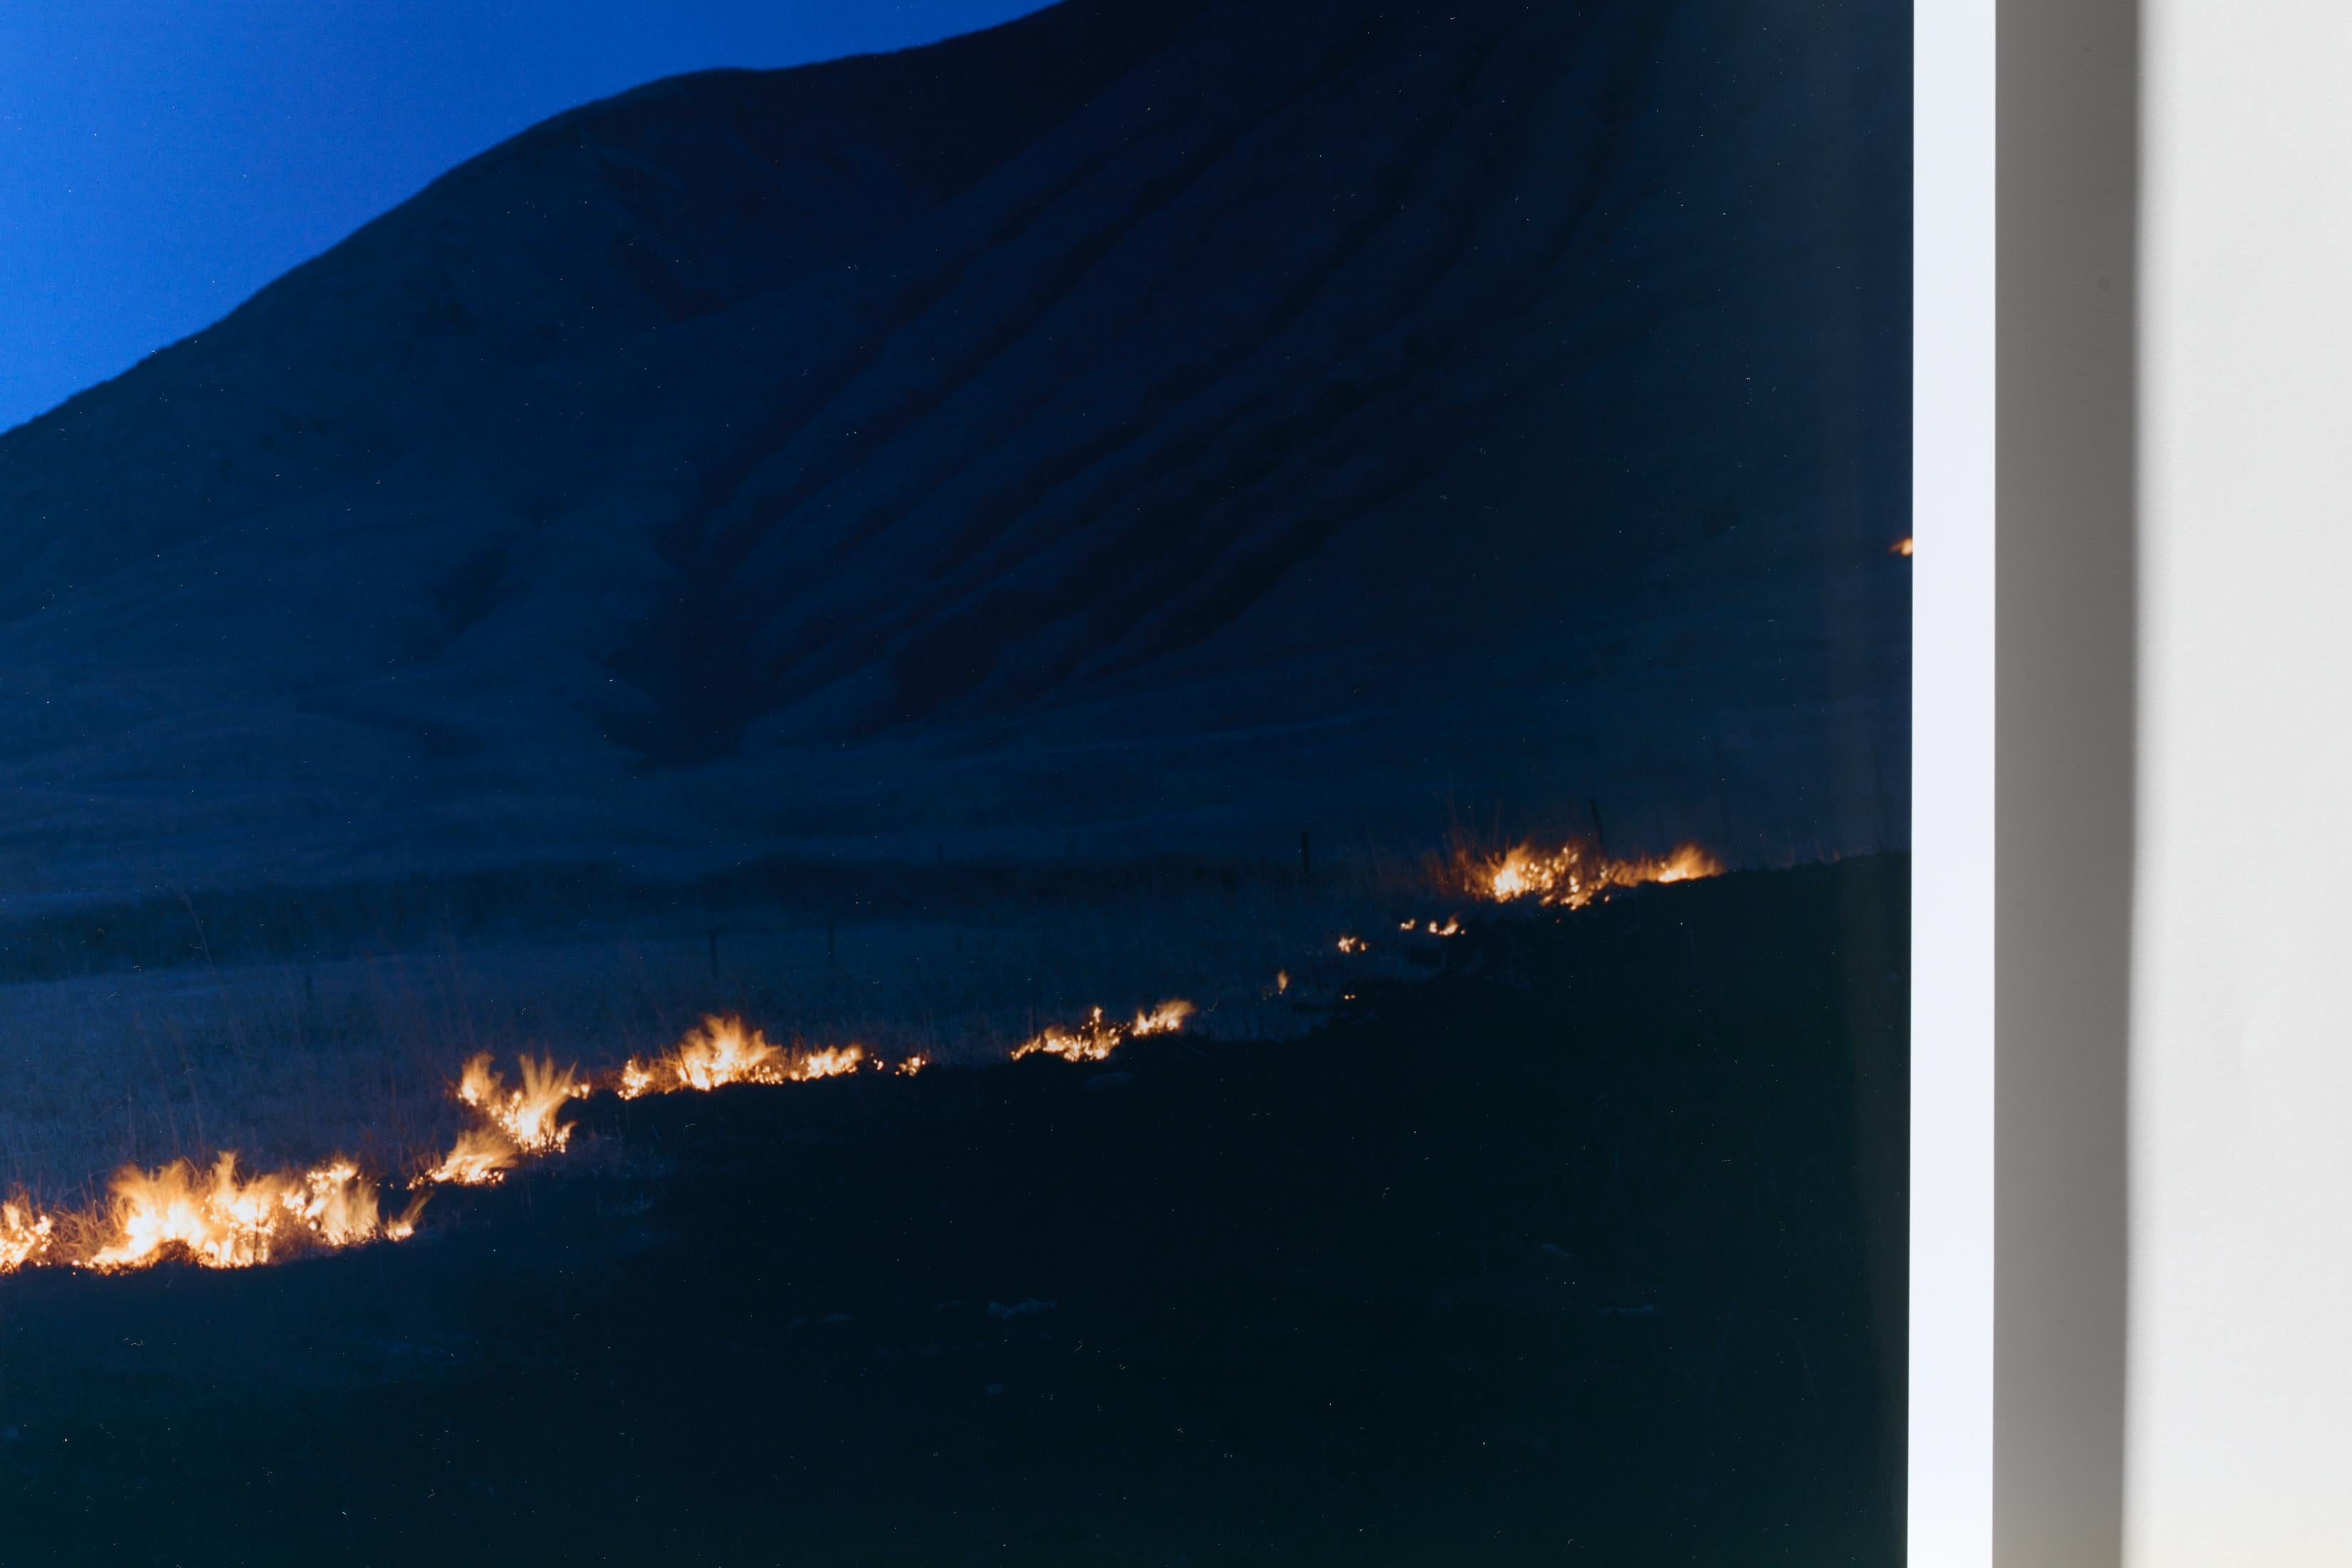 With a title that loosely translates to “heaven and earth,” Rinko Kawauchi’s 2013 publication, Ametsuchi addresses the inherently circular nature of creation and destruction through a visual examination of traditional Japanese agricultural